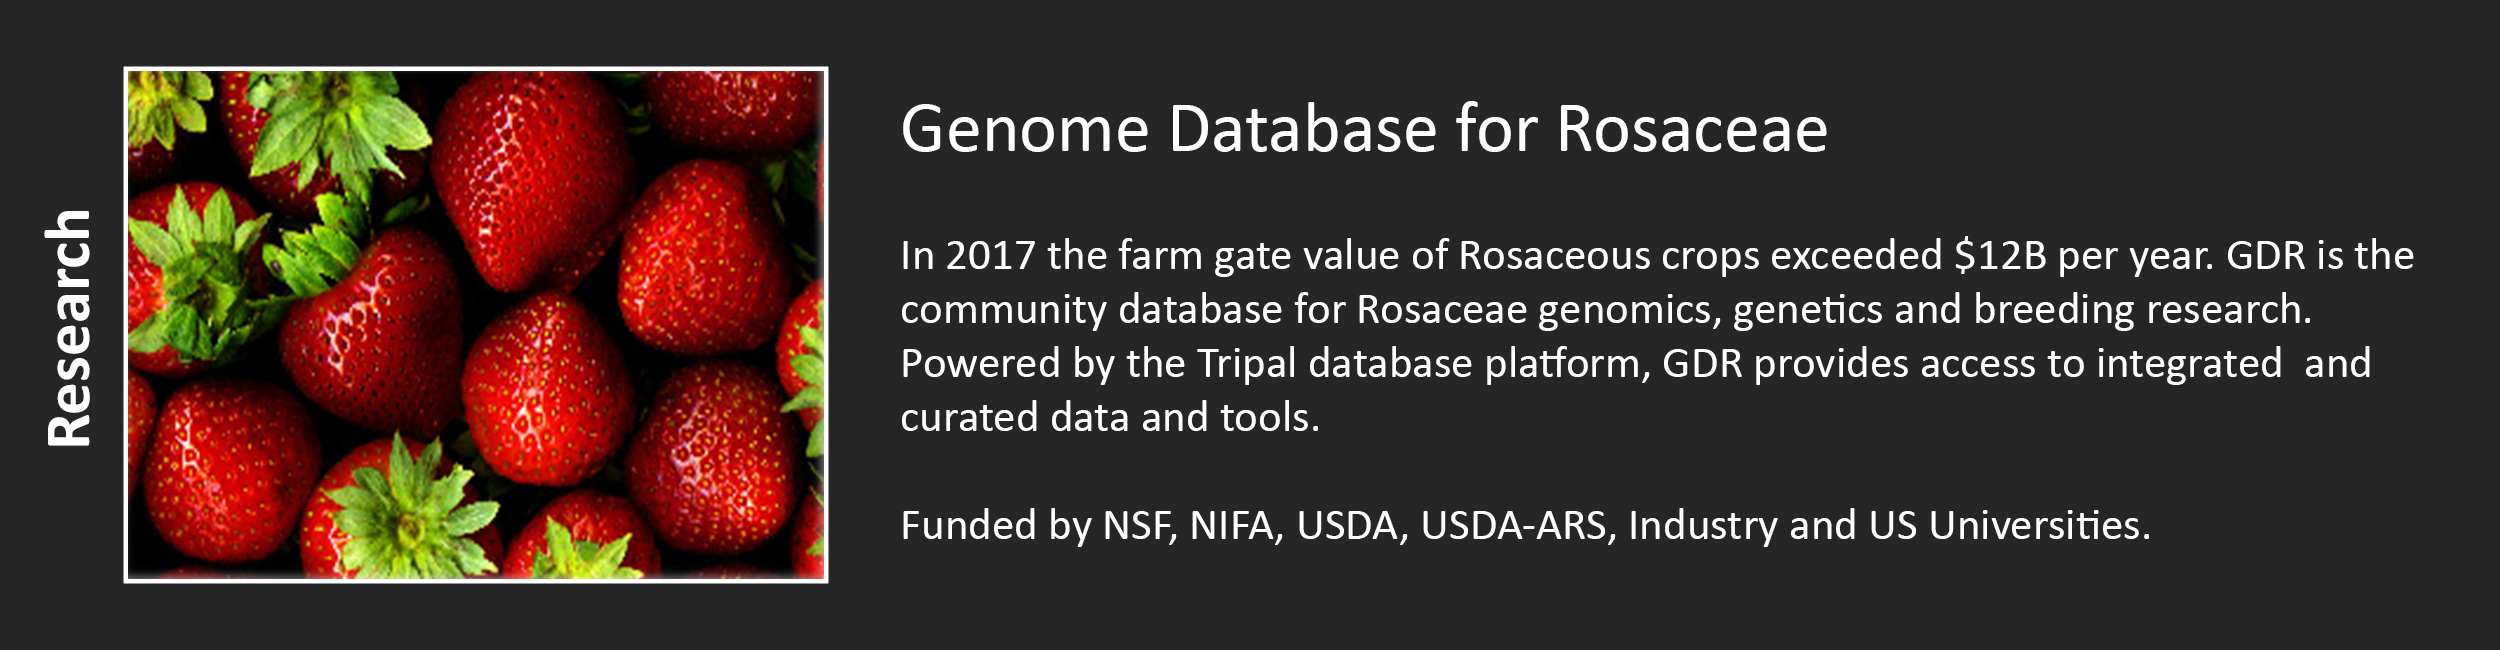 Genome Database for Rosaceae